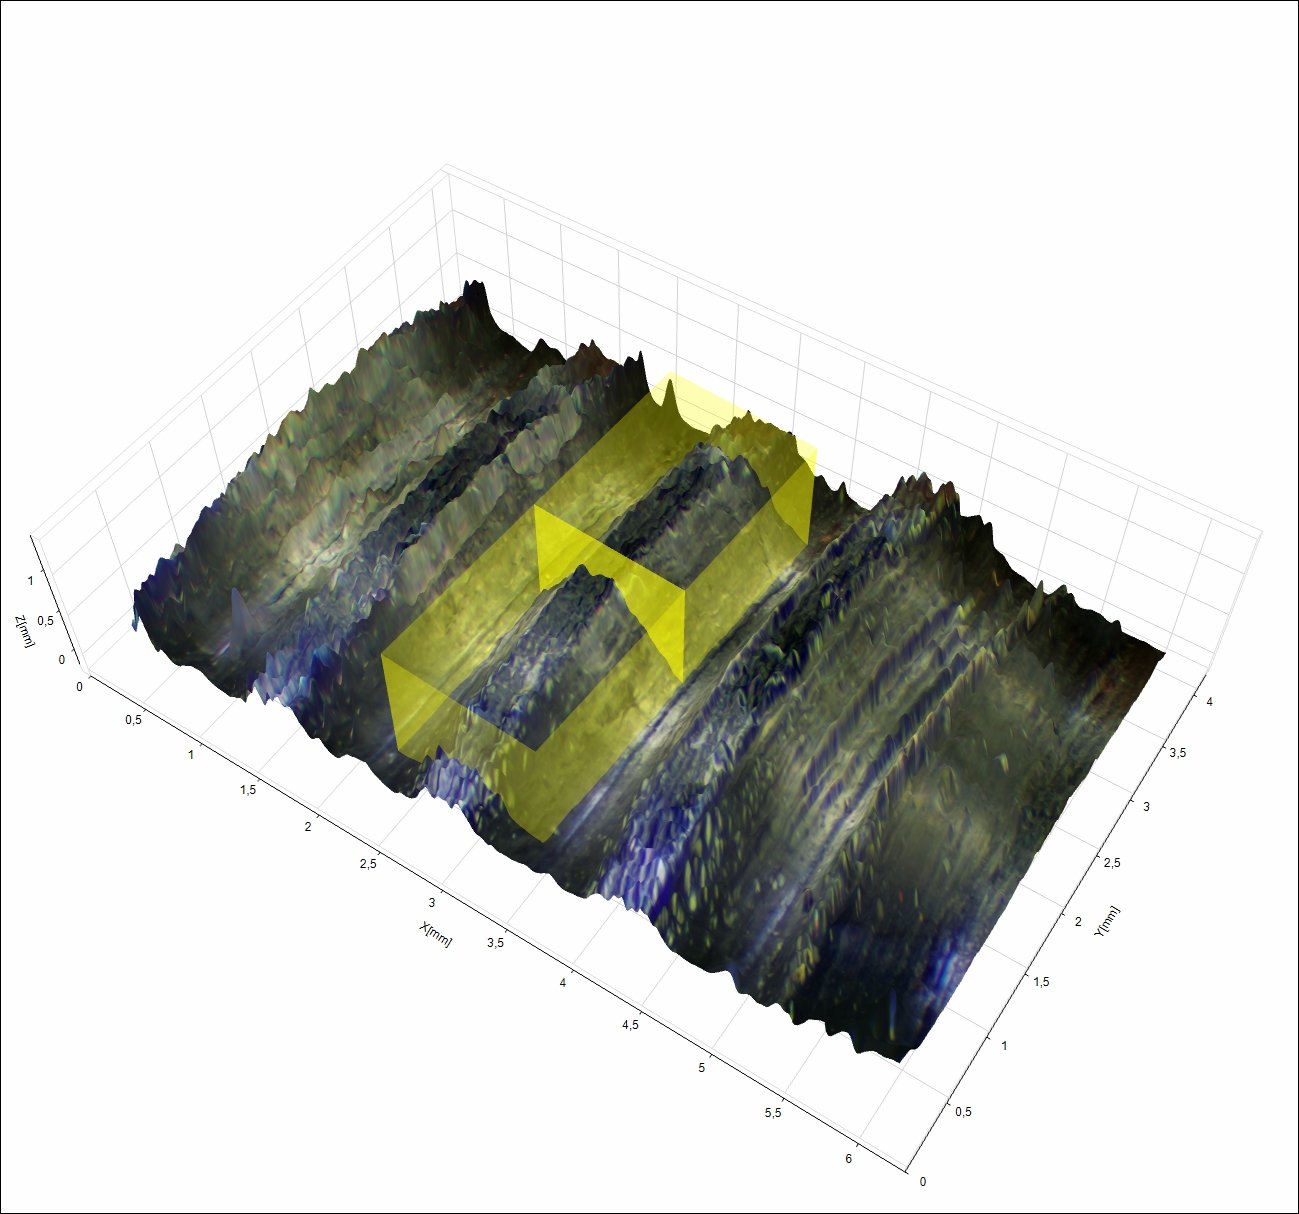 3D topography of a screw